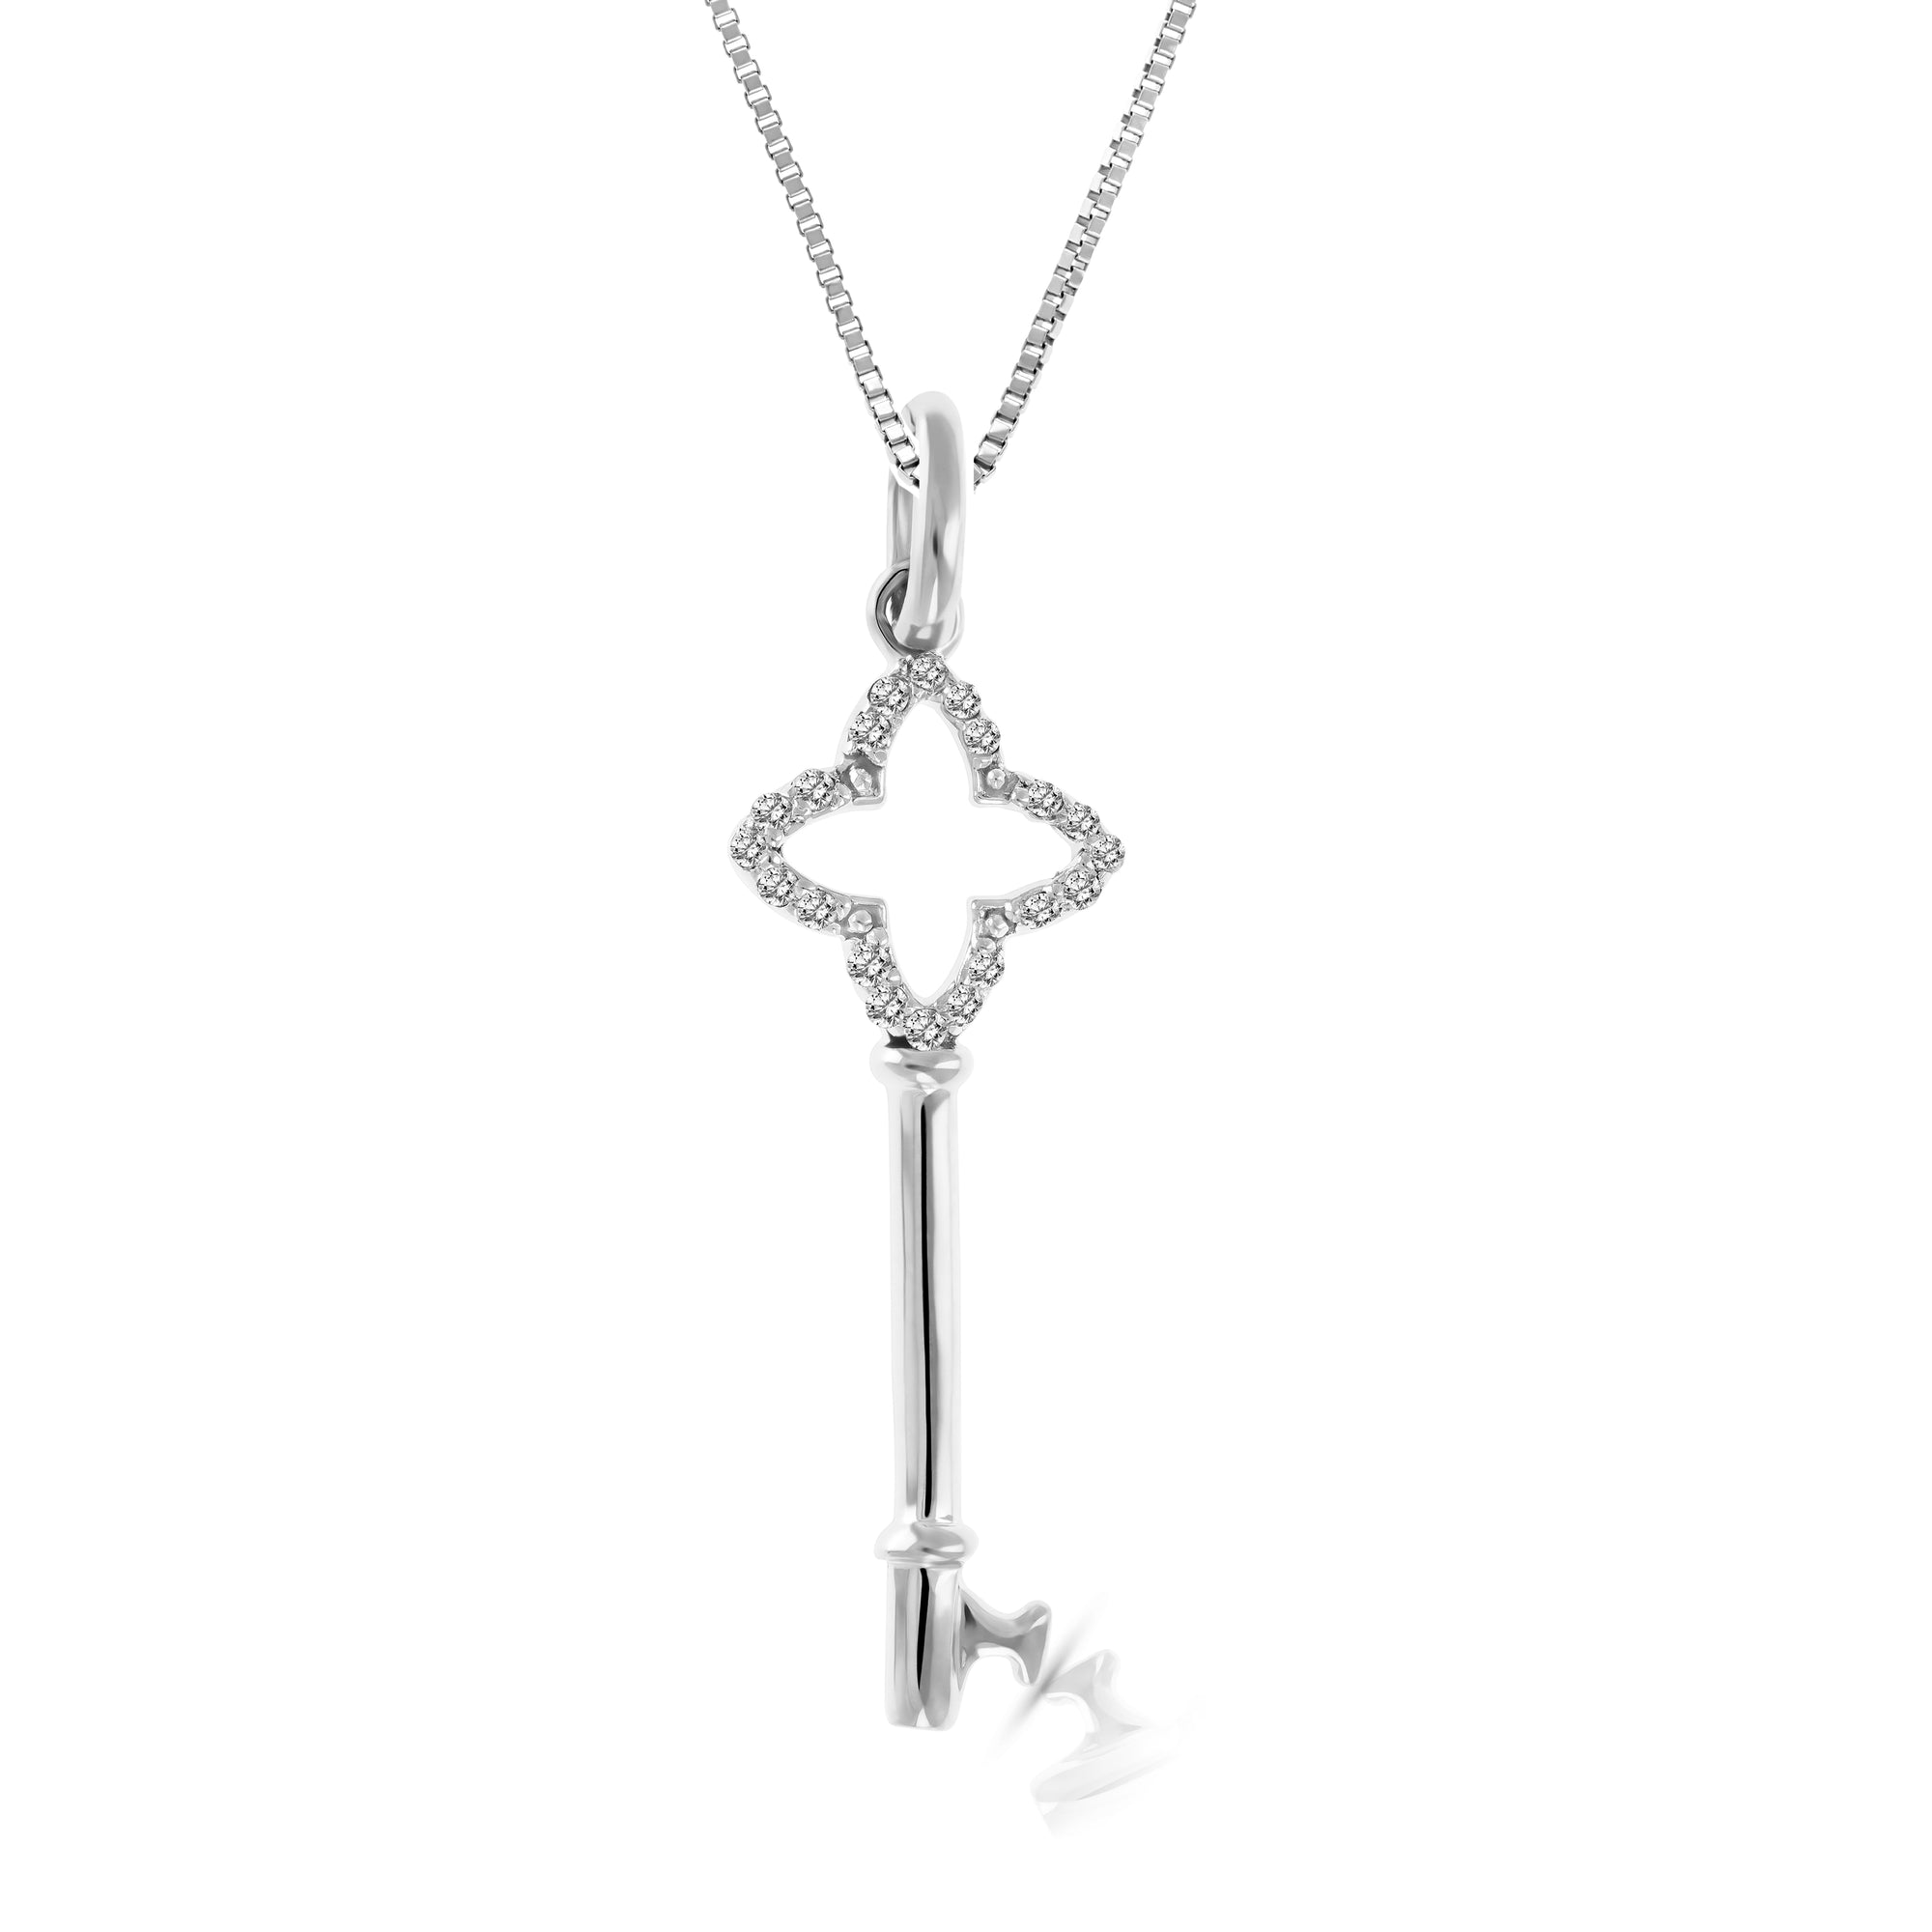 1/10 cttw Diamond Pendant, Diamond Clover Key Pendant Necklace for Women in .925 Sterling Silver with Rhodium, 18 Inch Chain, Prong Setting